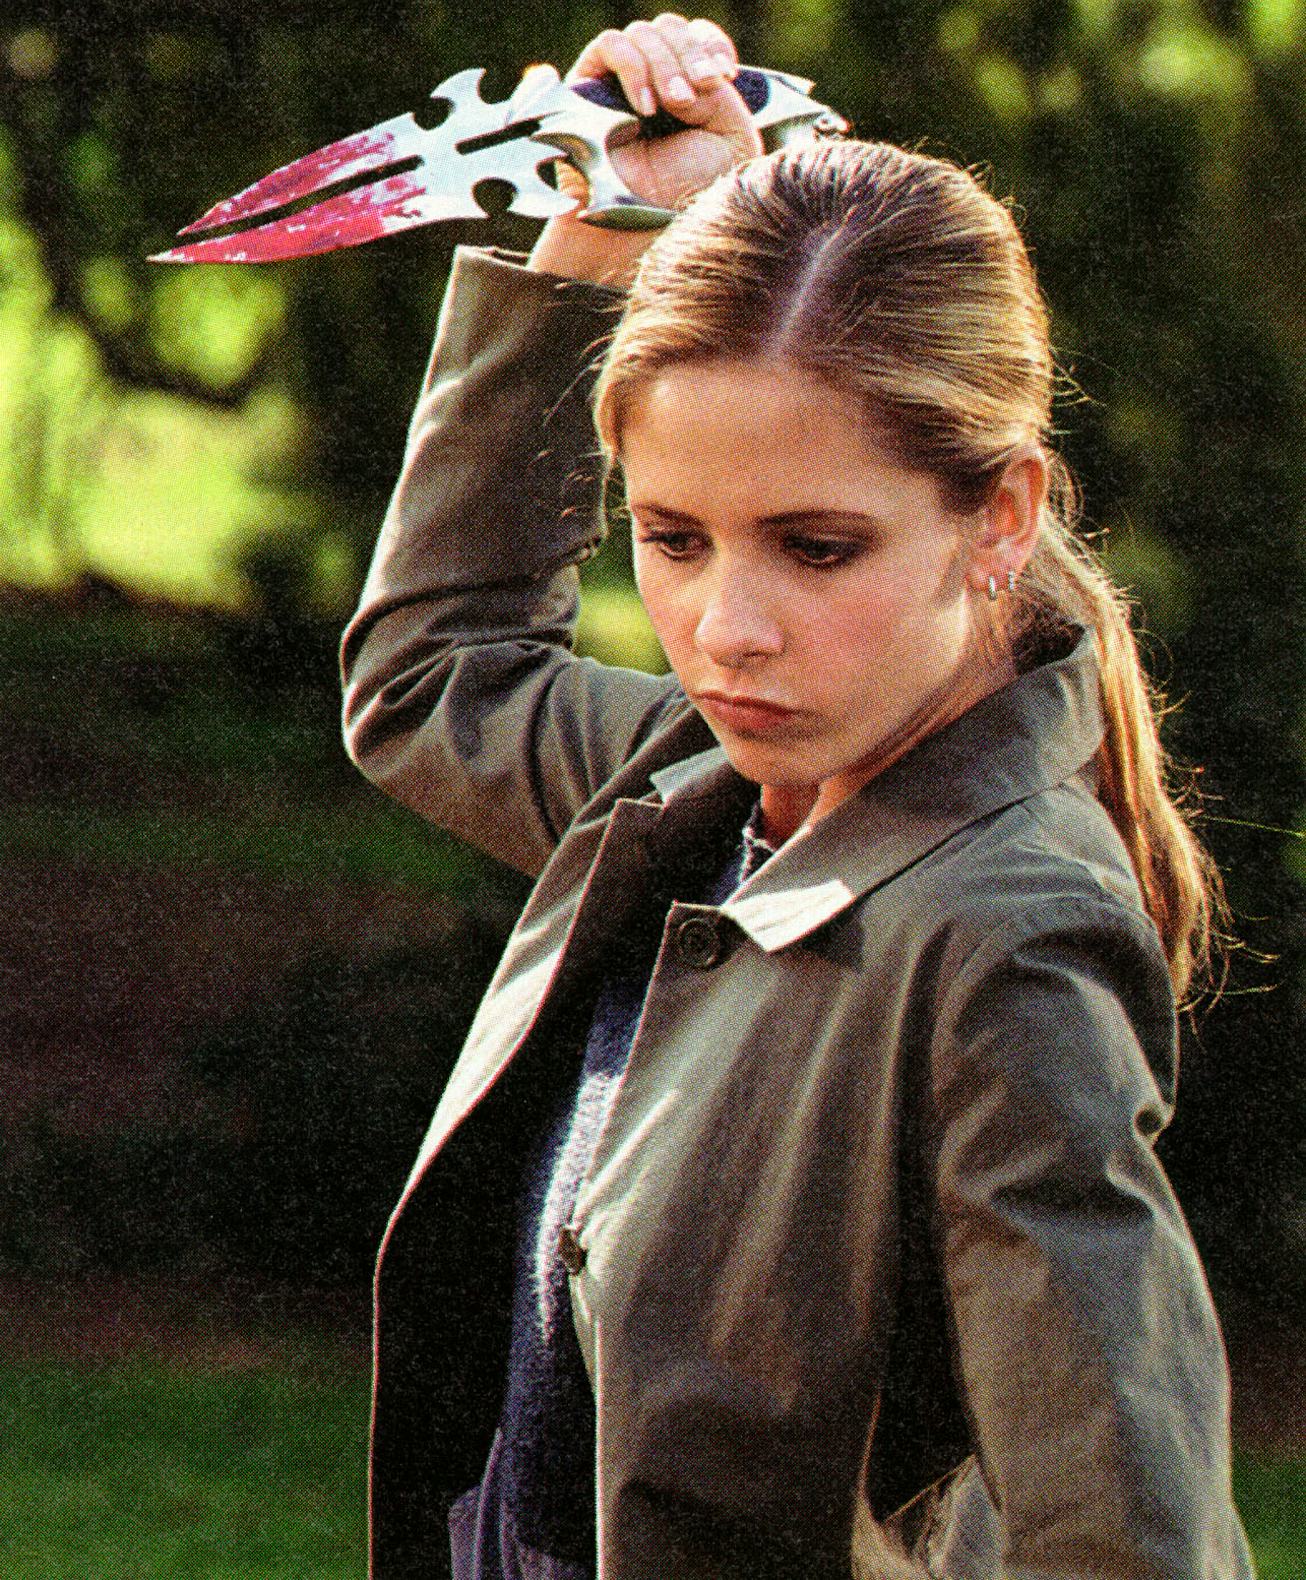 Buffy Summers is Buffy the Vampire Slayer.